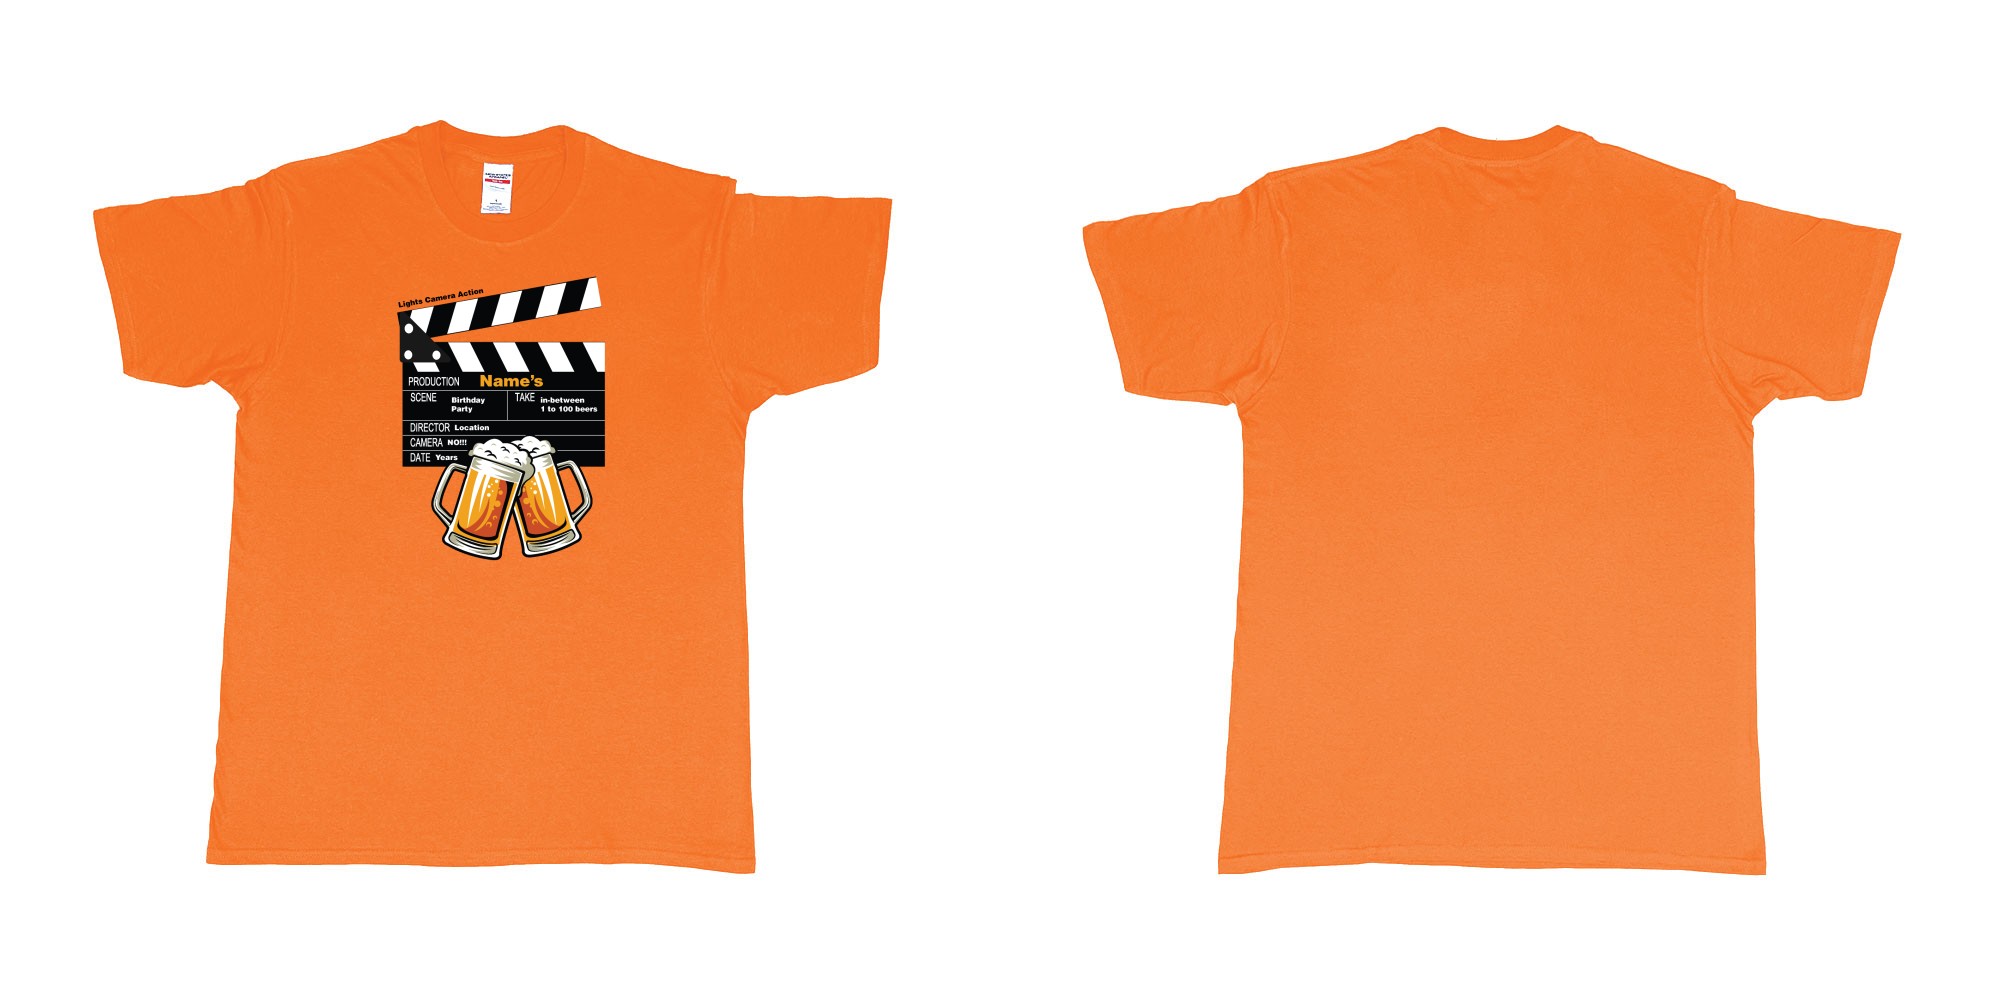 Custom tshirt design birthday beers movie clapperboard in fabric color orange choice your own text made in Bali by The Pirate Way